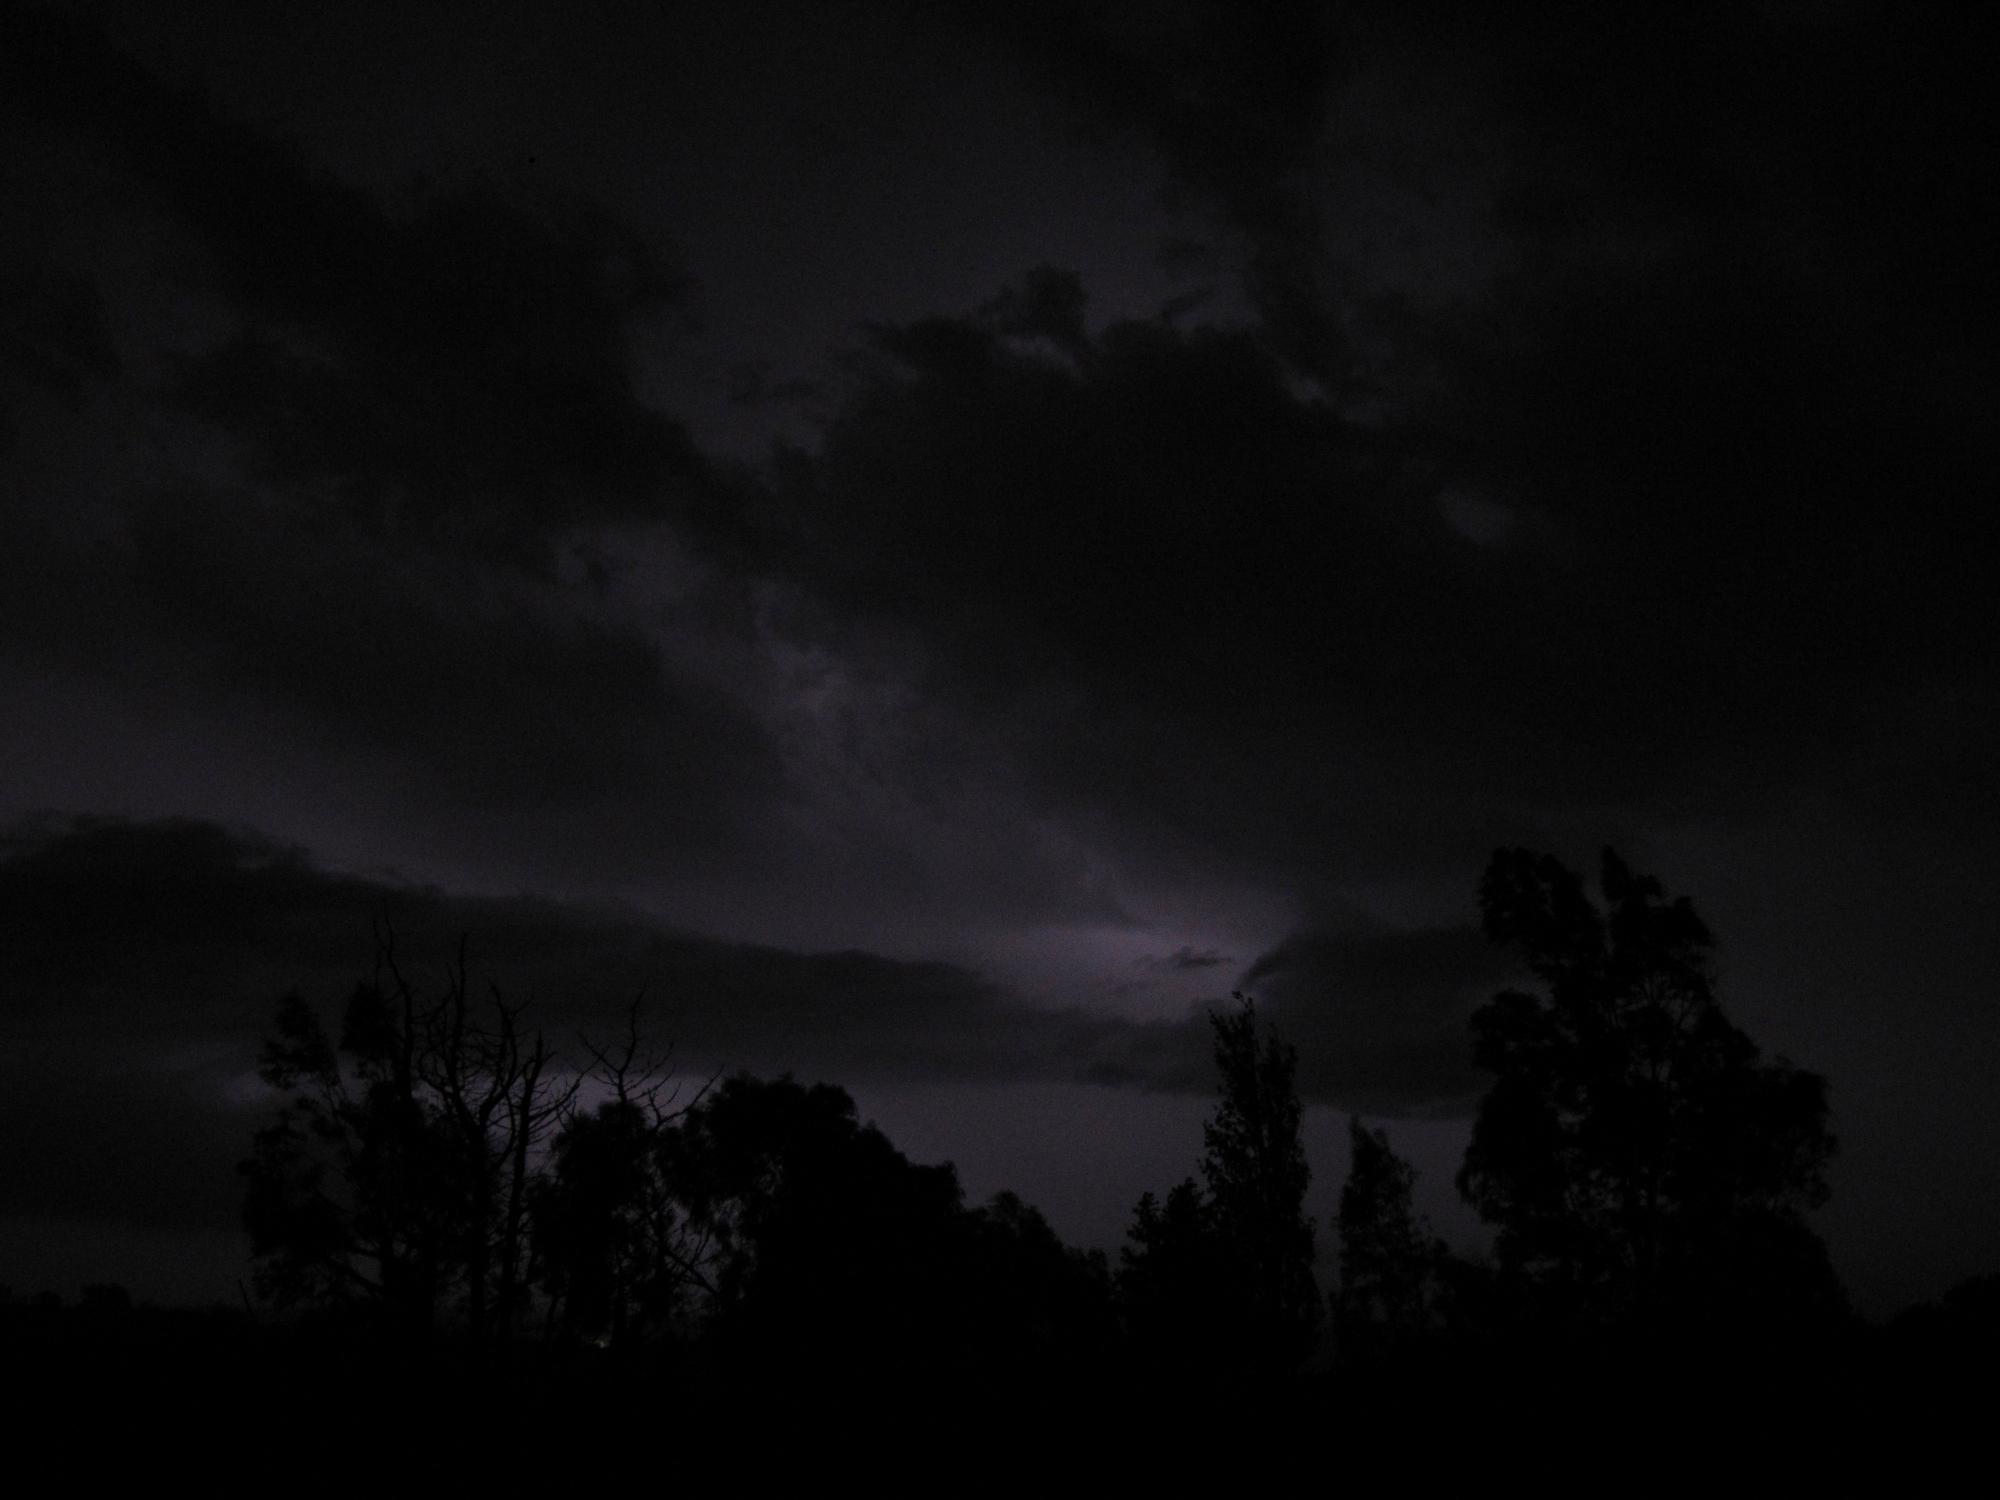 Image Dark Stormy Night Sky Pc Android iPhone And iPad Wallpaper